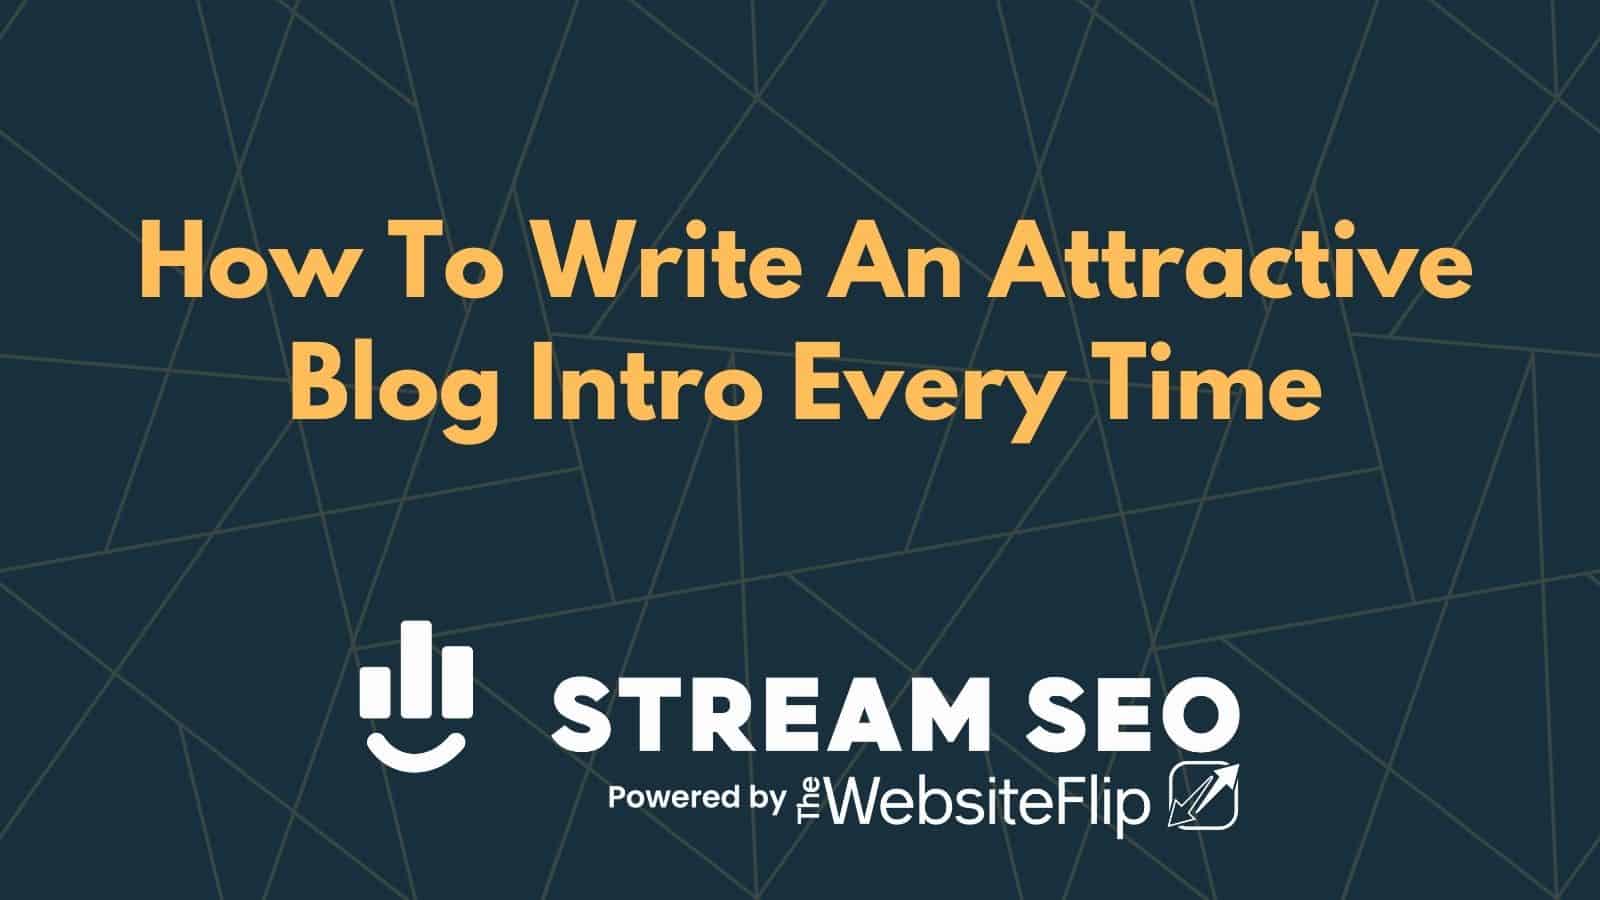 How To Write An Attractive Blog Intro Every Time